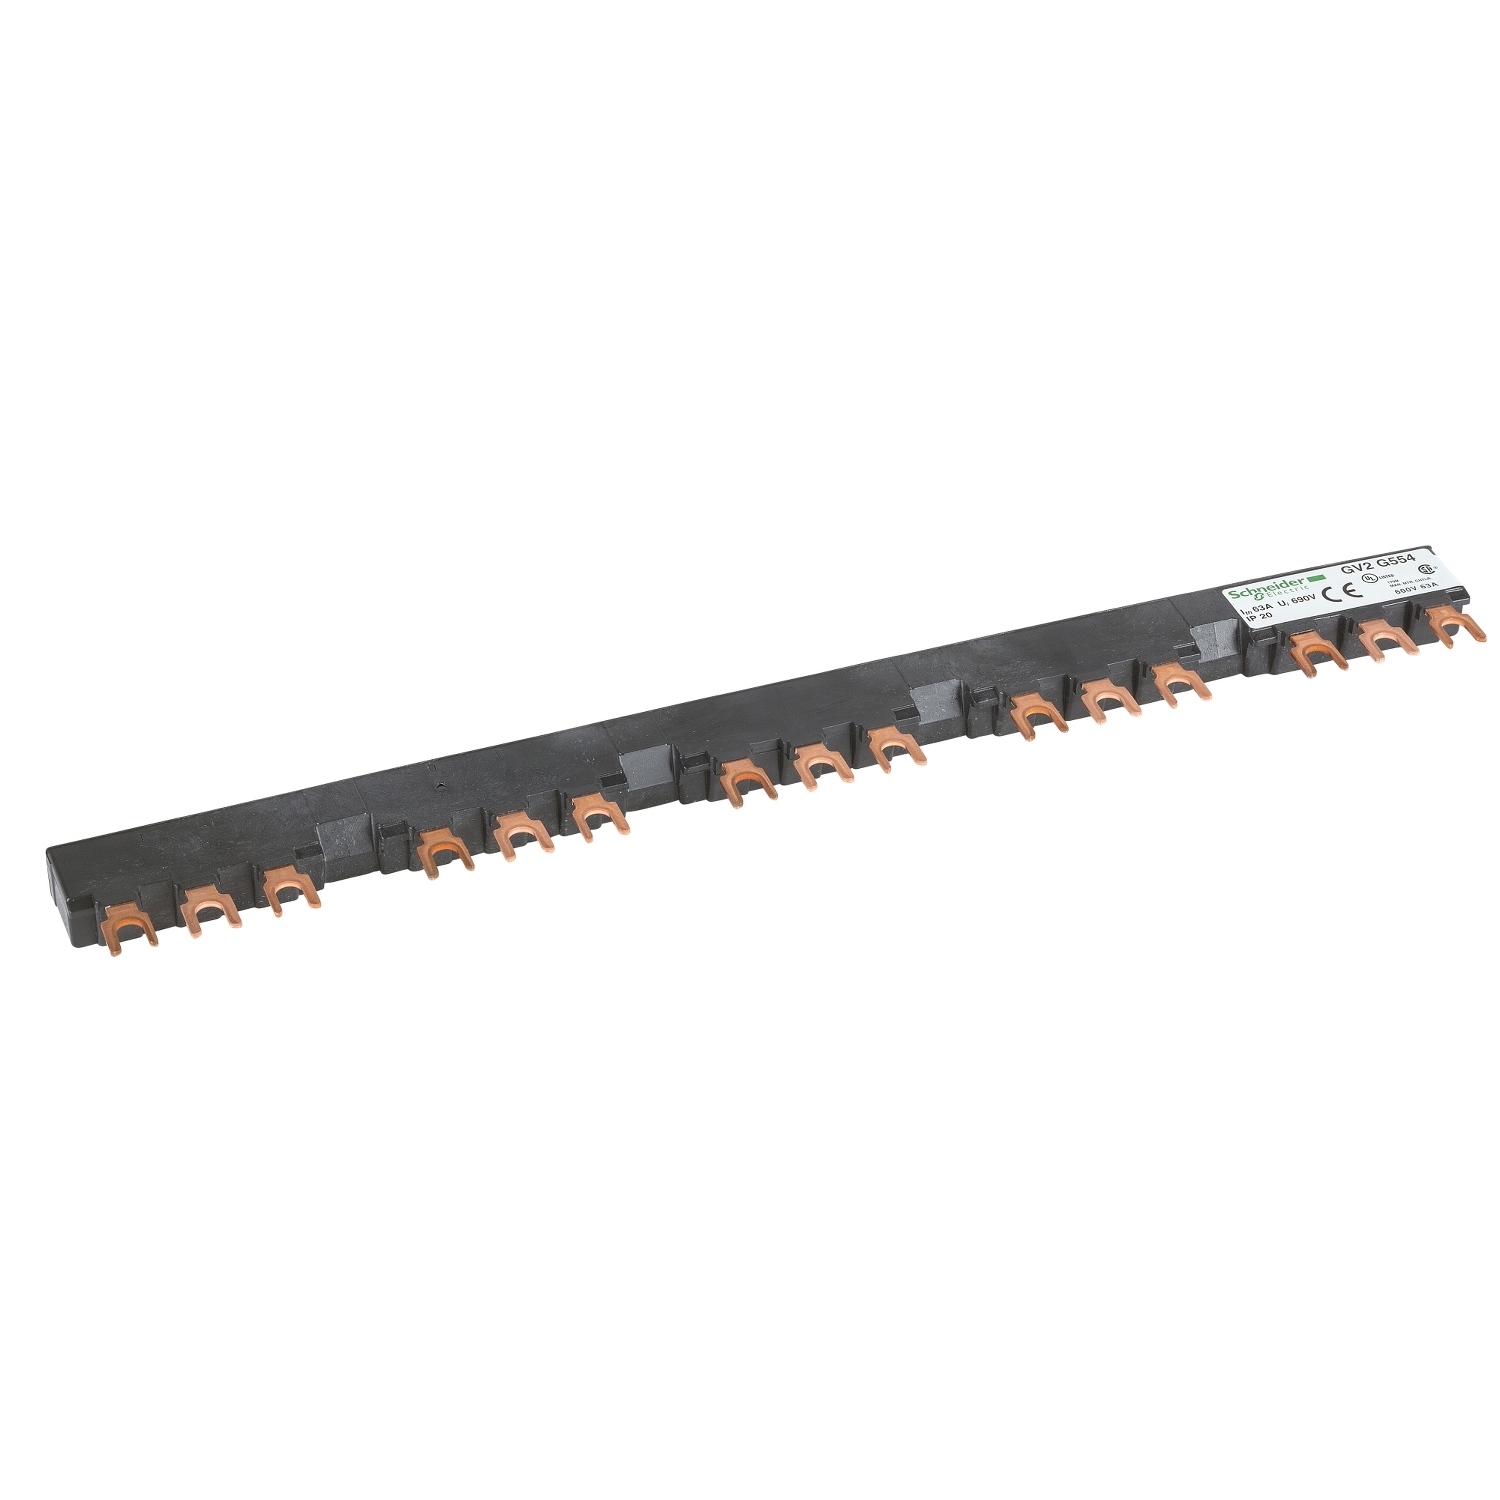 Linergy FT, Comb busbar, 63 A, 5 tap-offs, 54 mm pitch